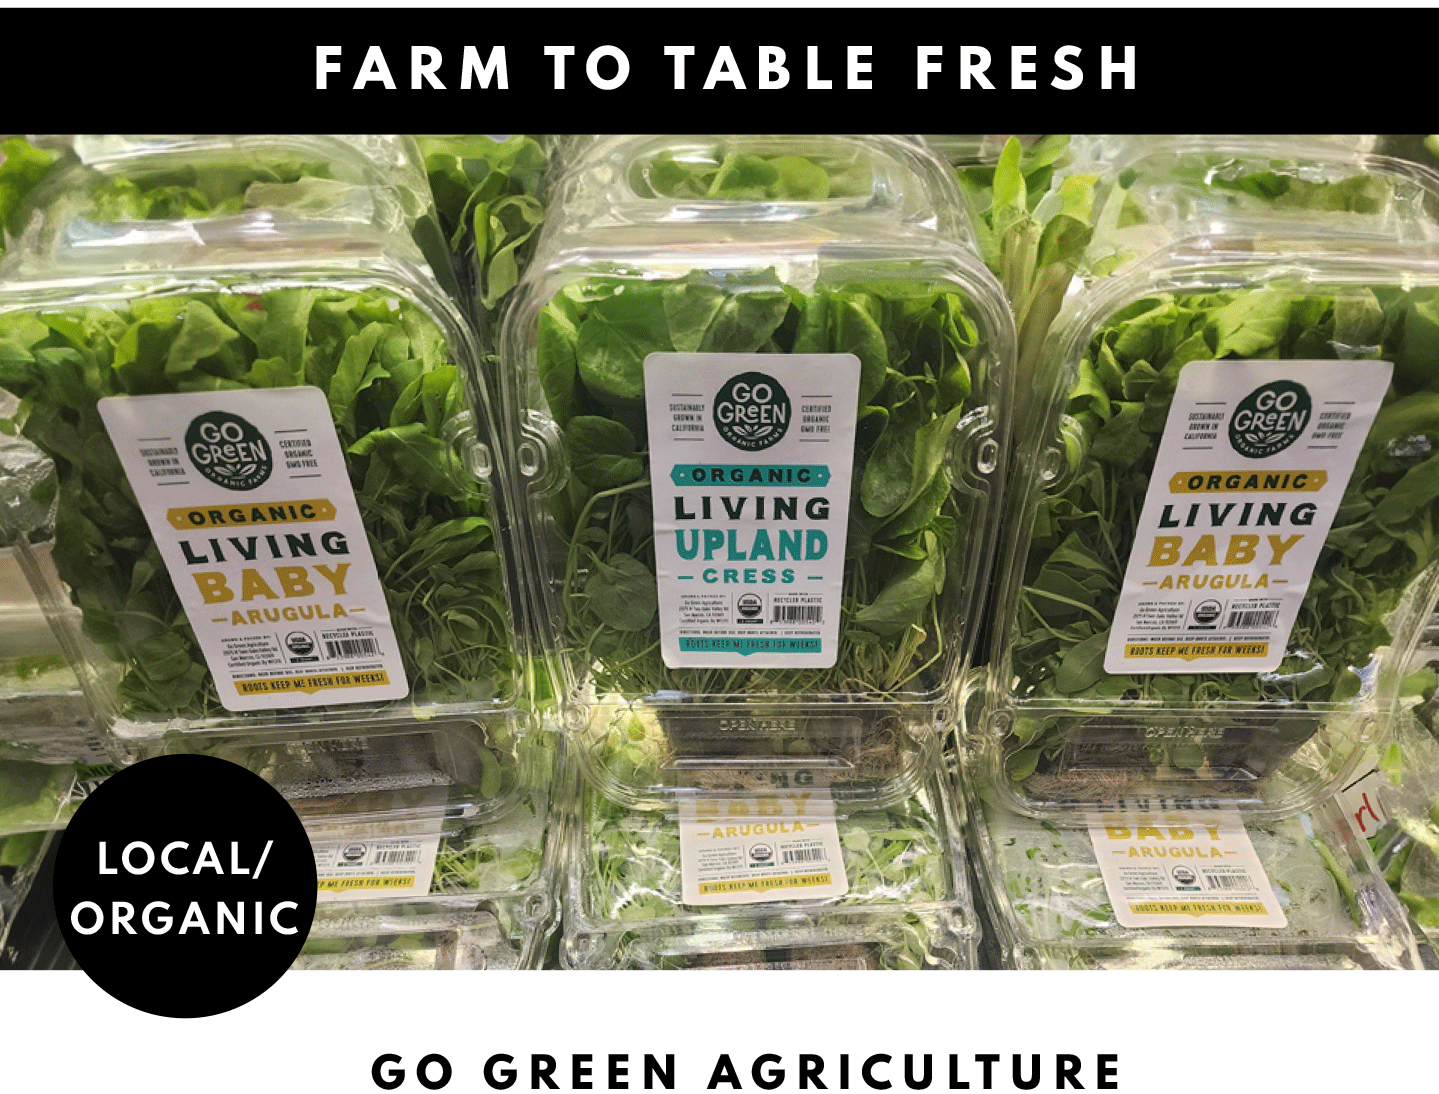 Go Green Agriculture, Living baby Arugula or Organic Living Baby Watercress 2 count package $4.99 ea, Red Cherries $14.99 ea, Blueberries 1 pint package $3.99 ea and Mini Watermelon 2/$6 ea